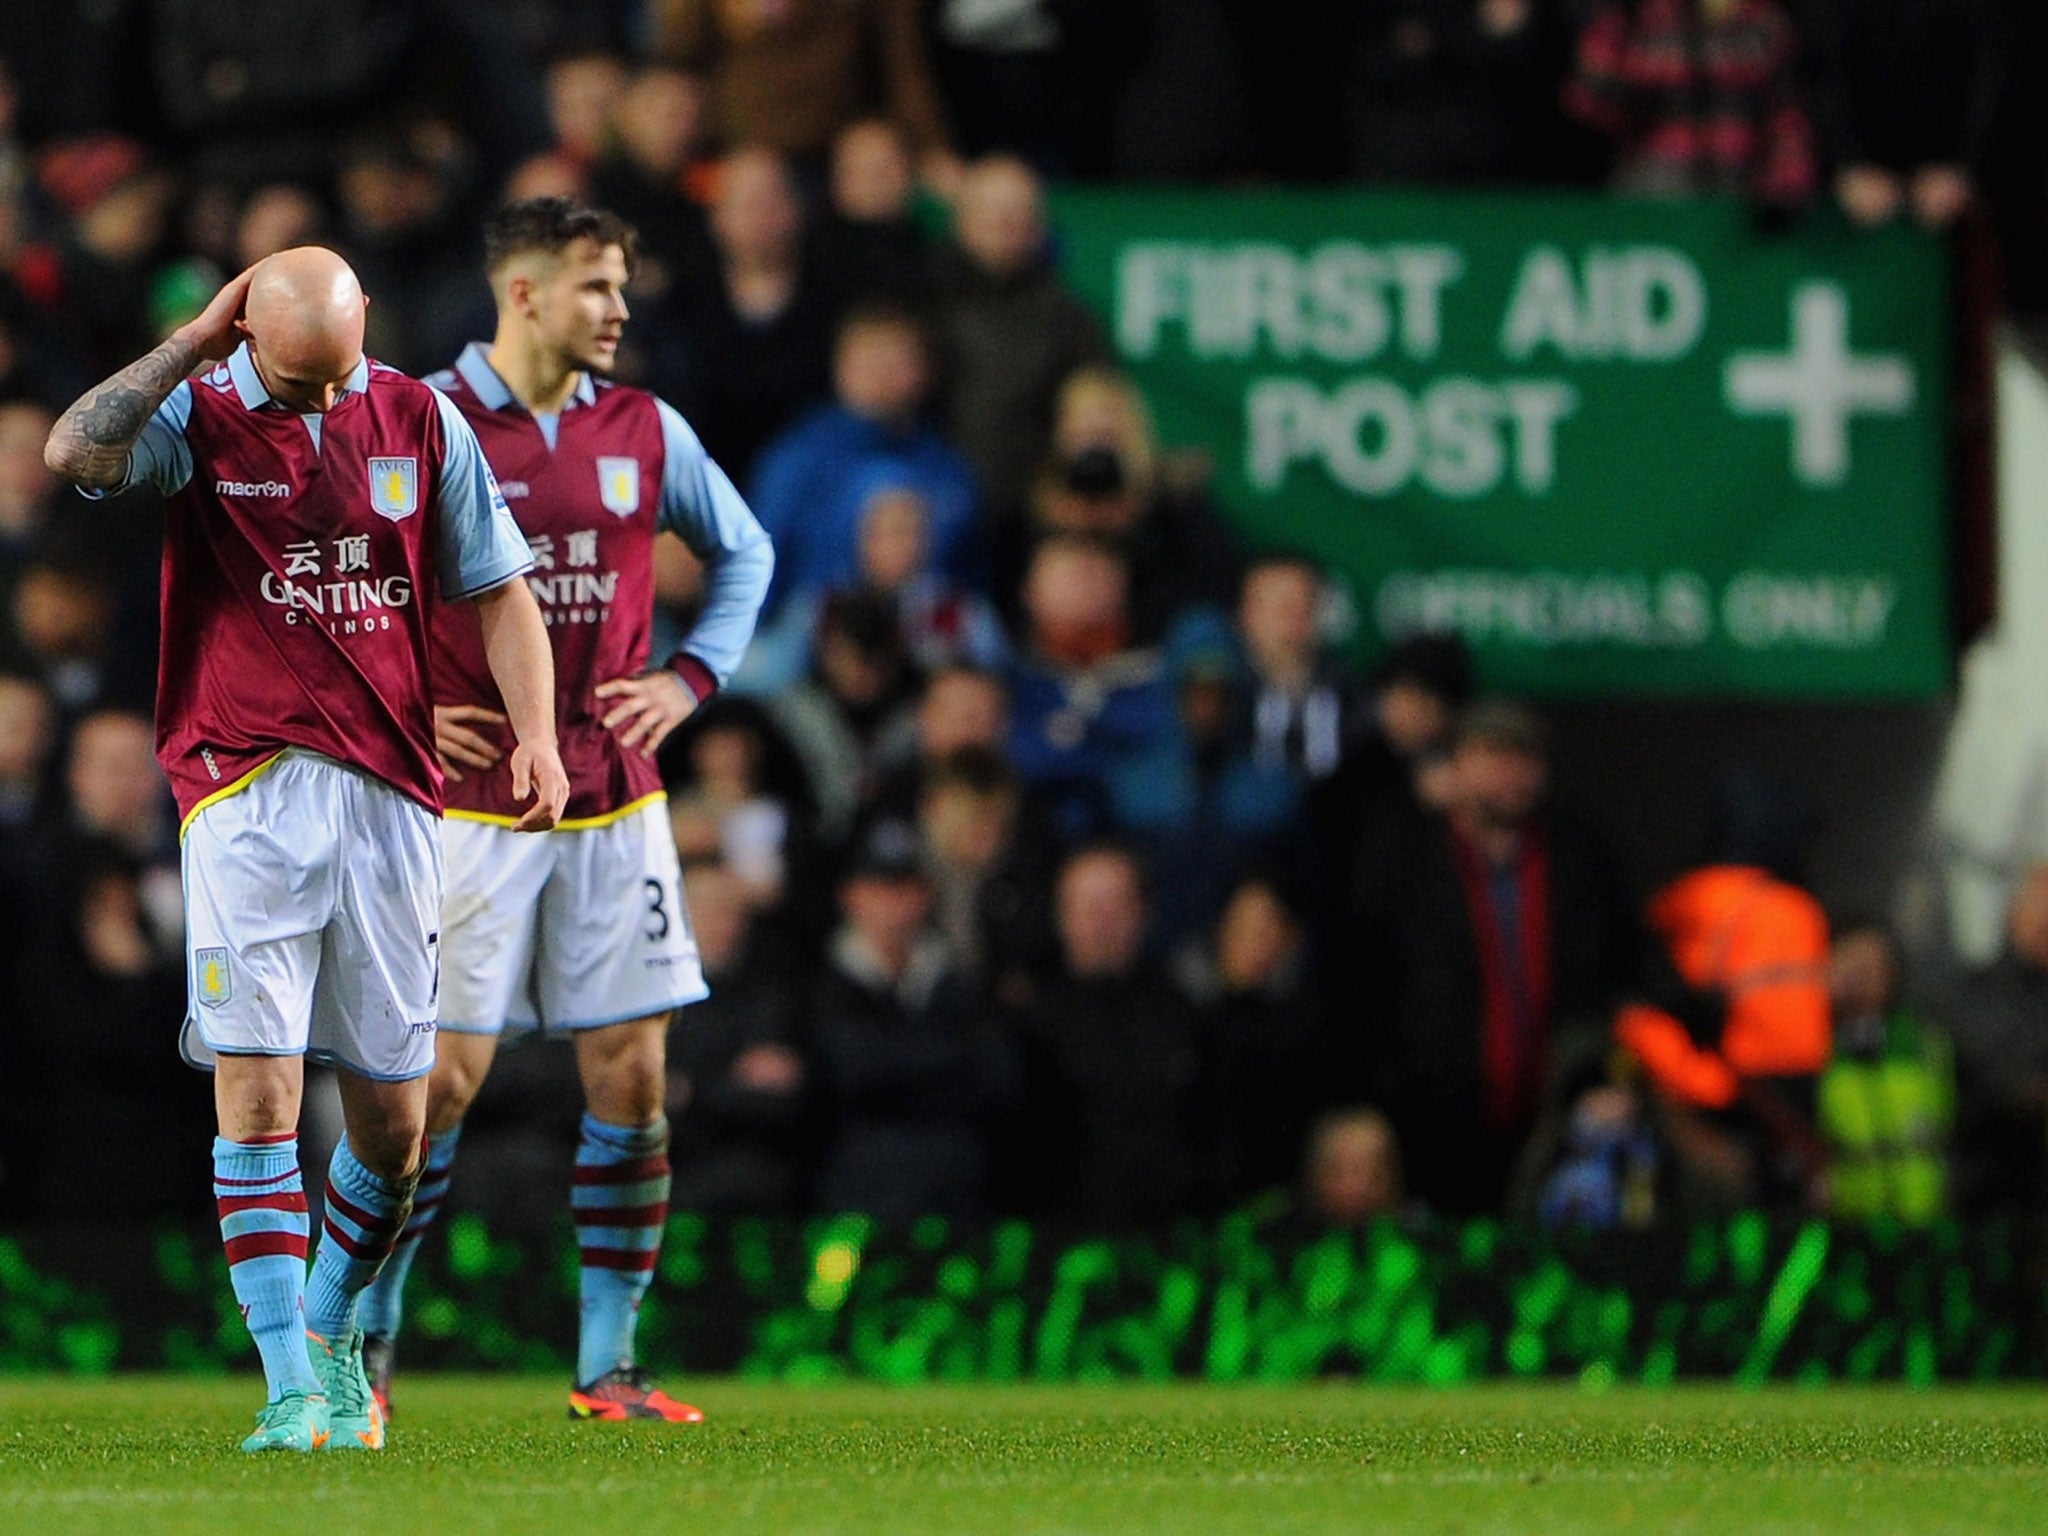 Stephen Ireland (left) and Chris Herd look on during their side's thumping by Wigan